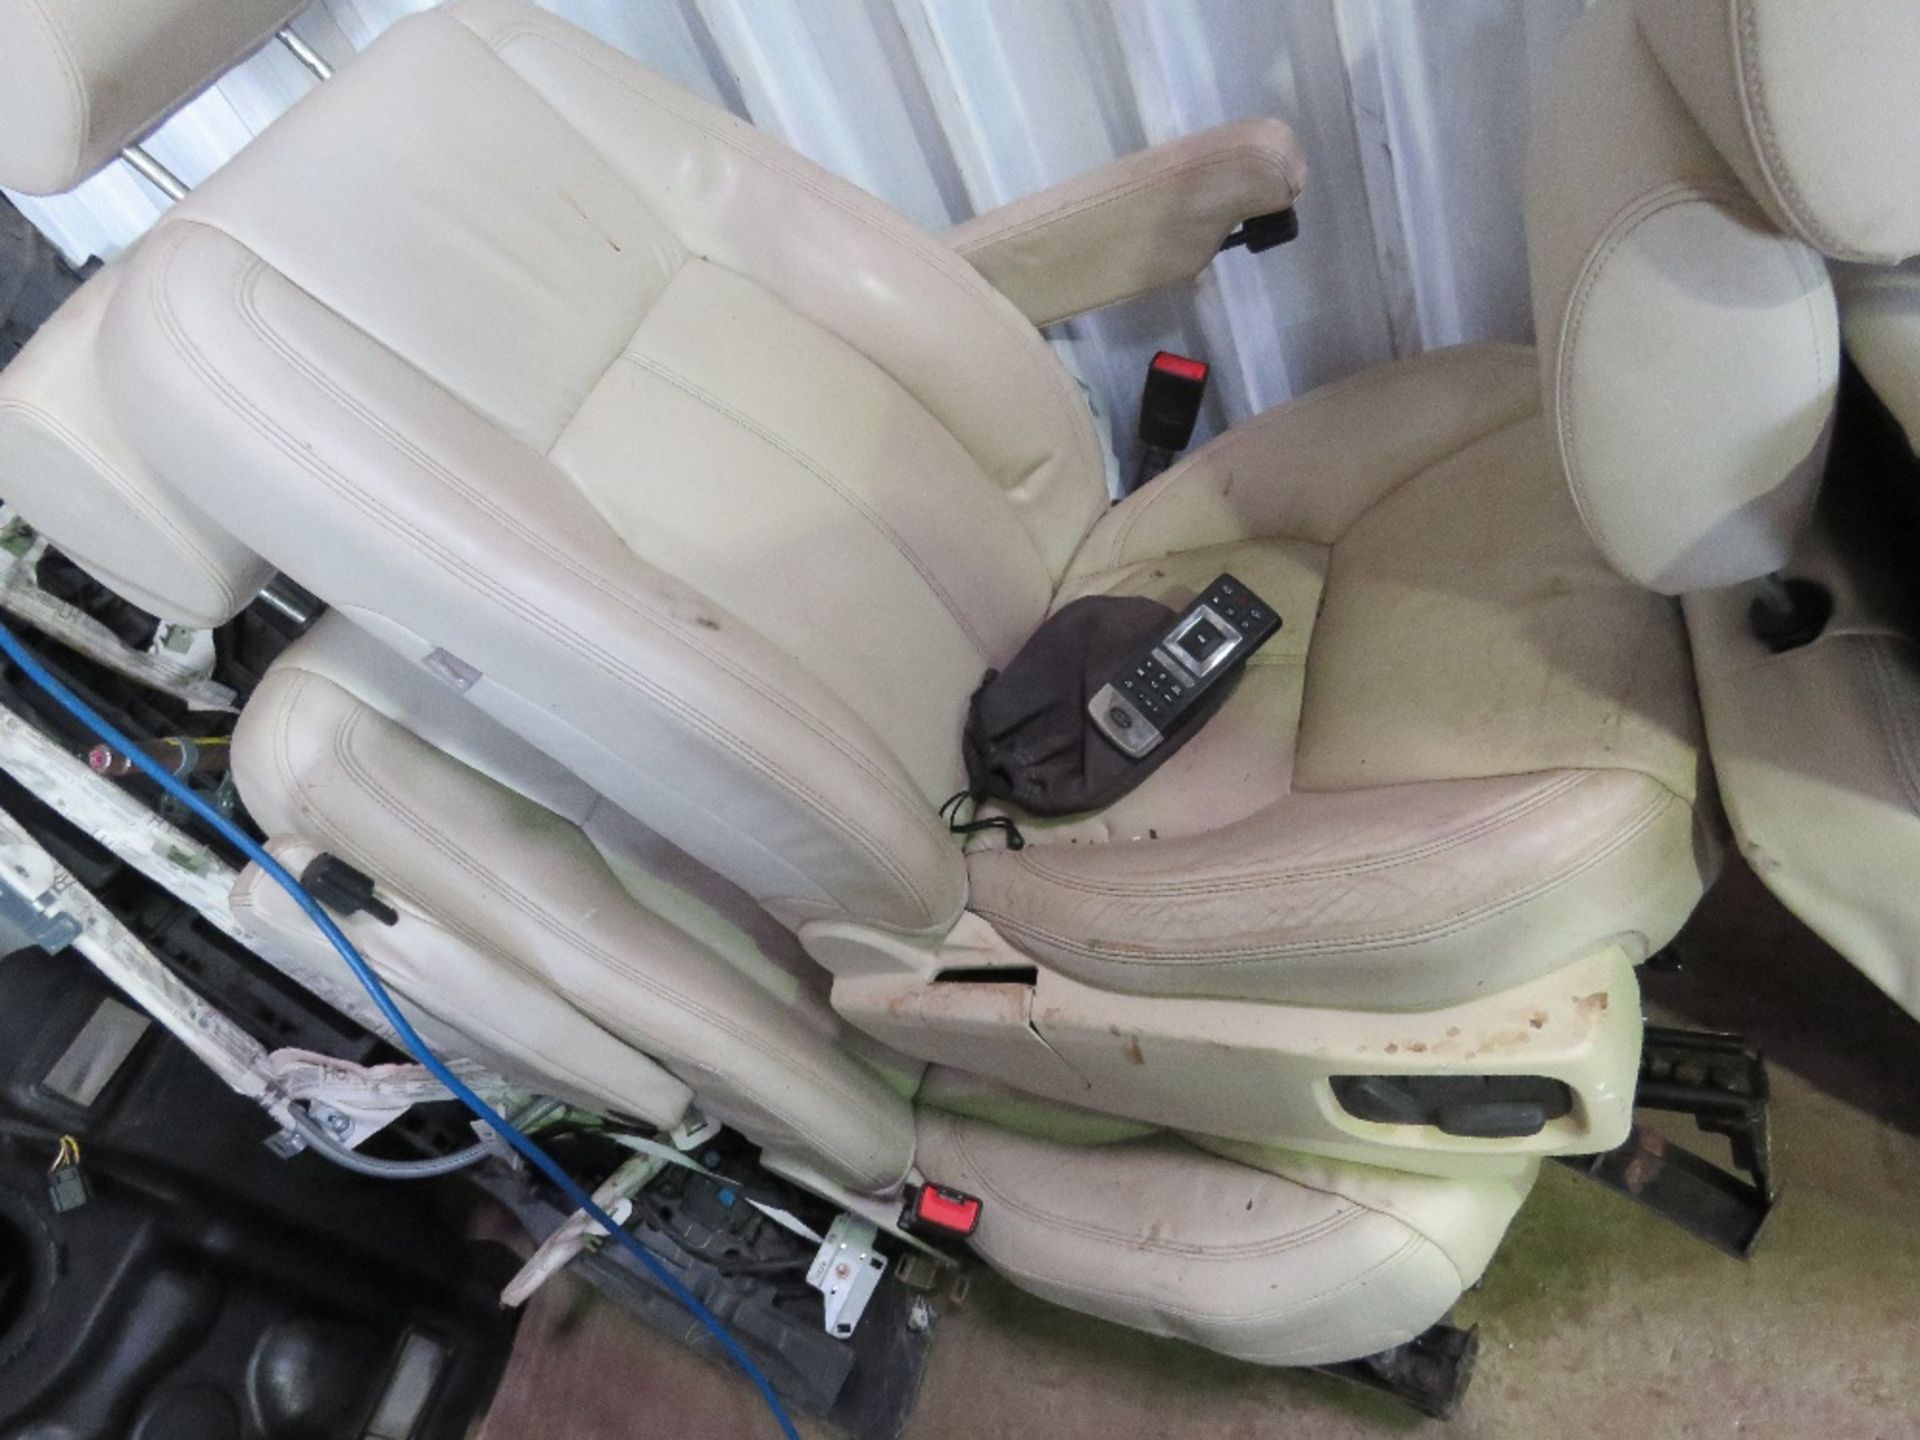 SET OF LEATHER DISCOVERY SEATS WITH ENTERTAINMENT IN HEADRESTS PLUS CURTAIN AIR BAGS. EX YEAR 2013 C - Image 3 of 11